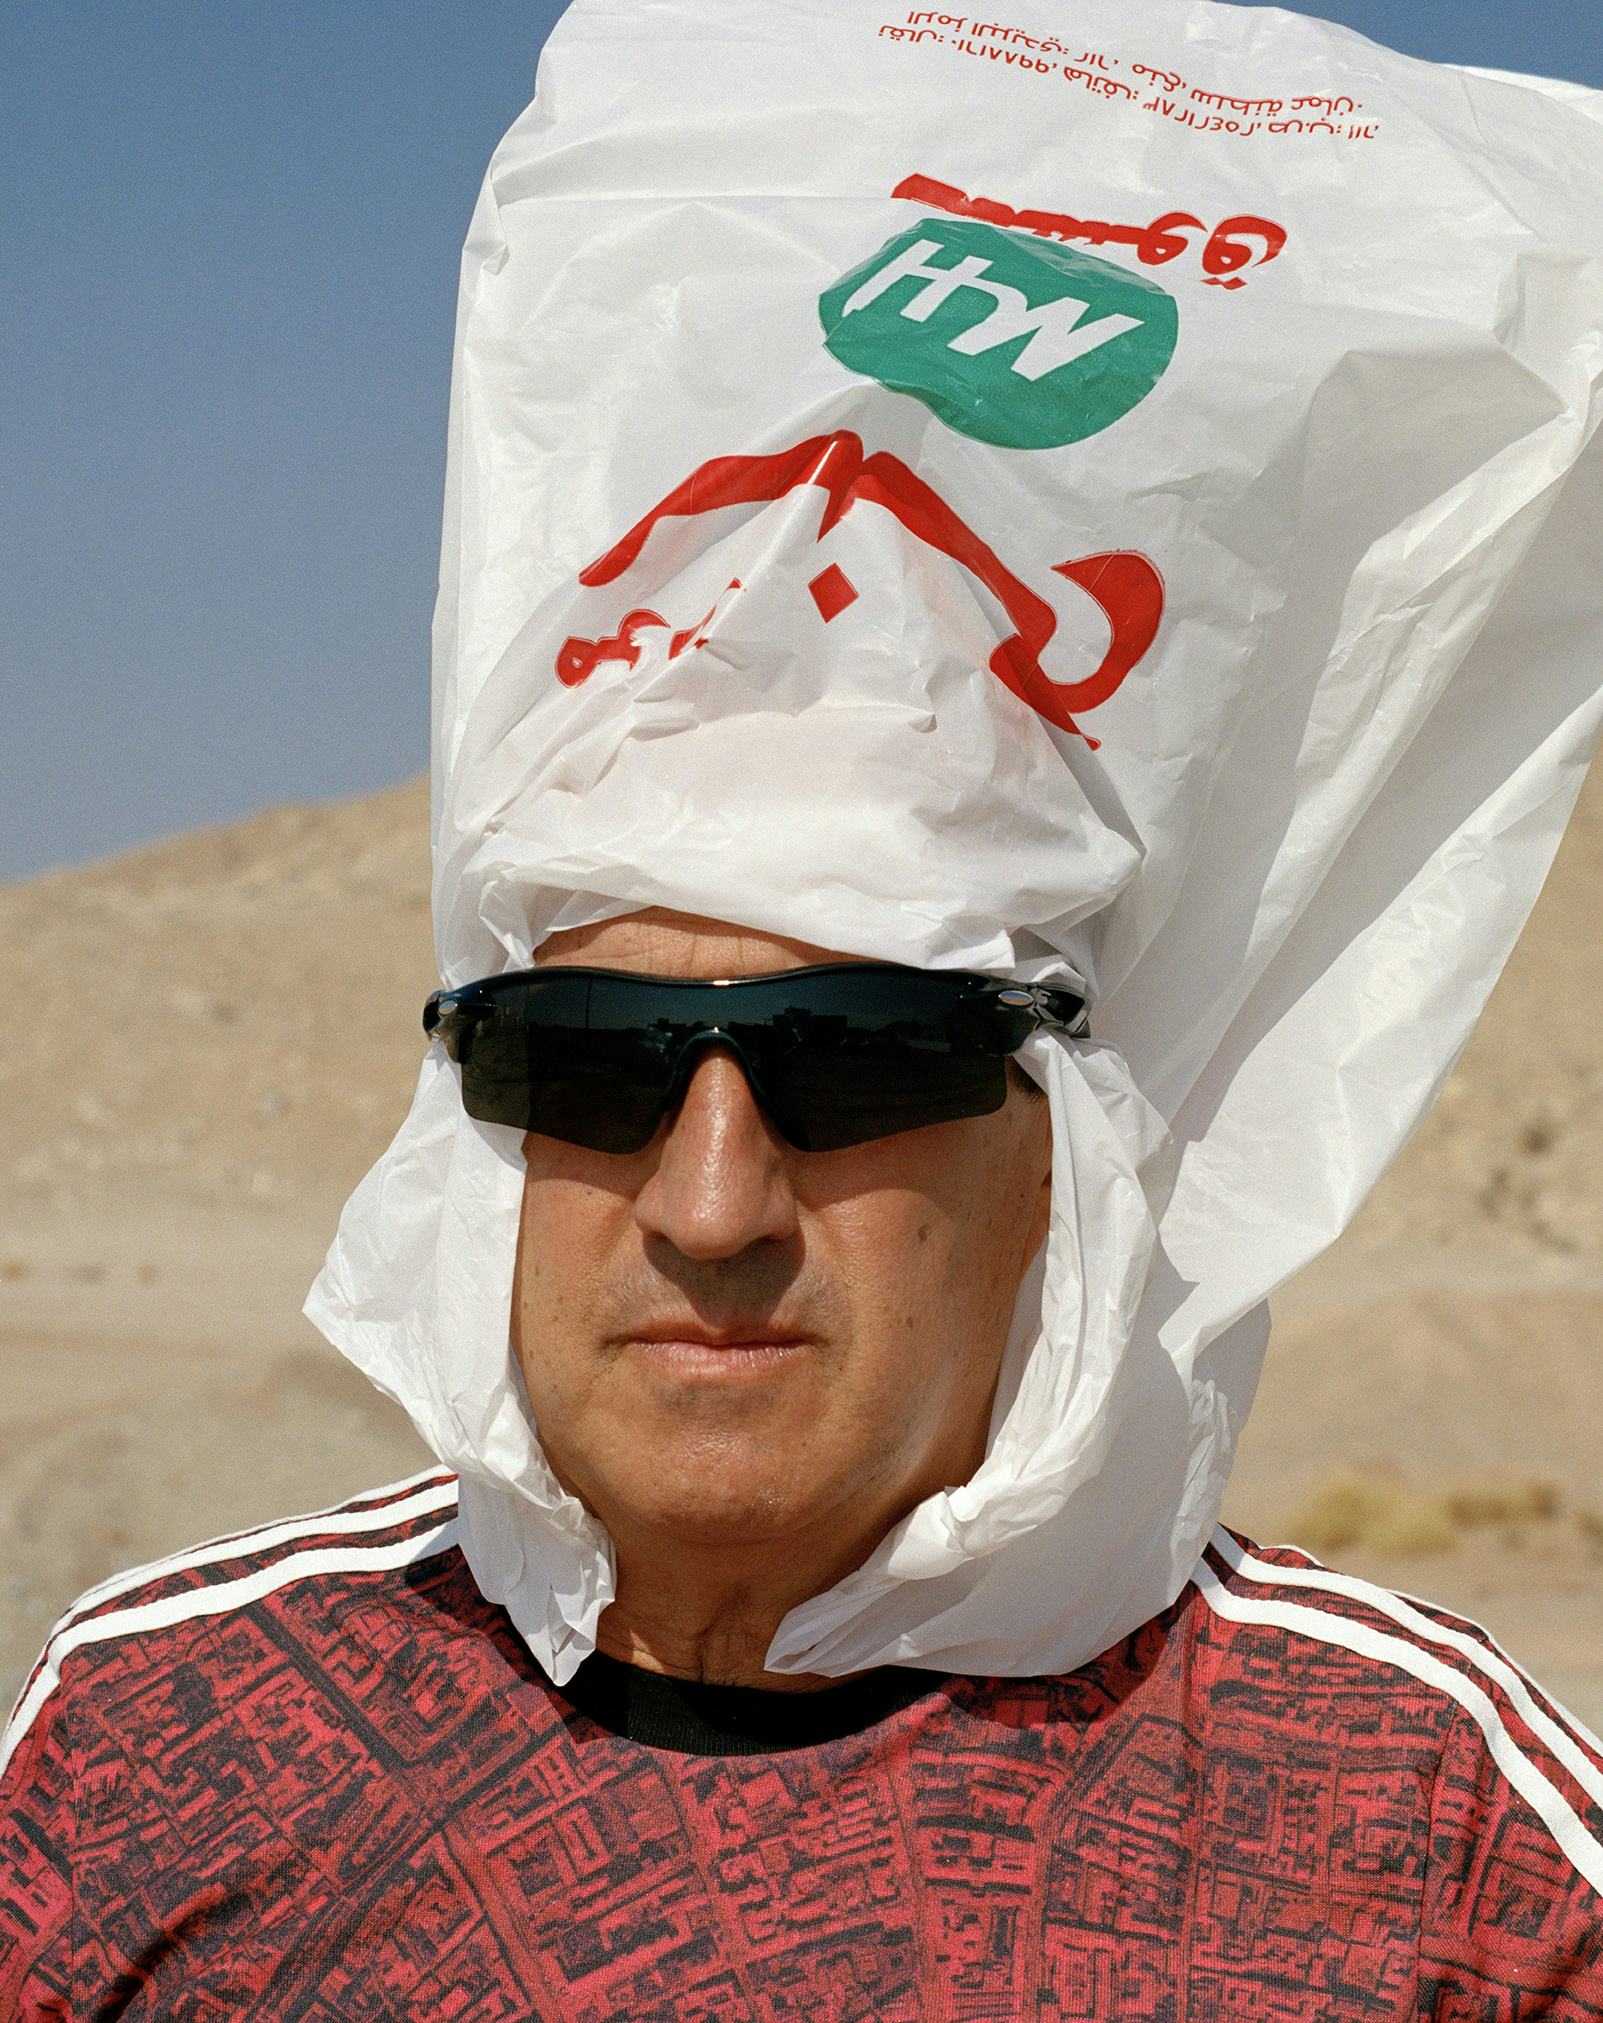 man with plastic bag on head red tshirt and black sunglasses